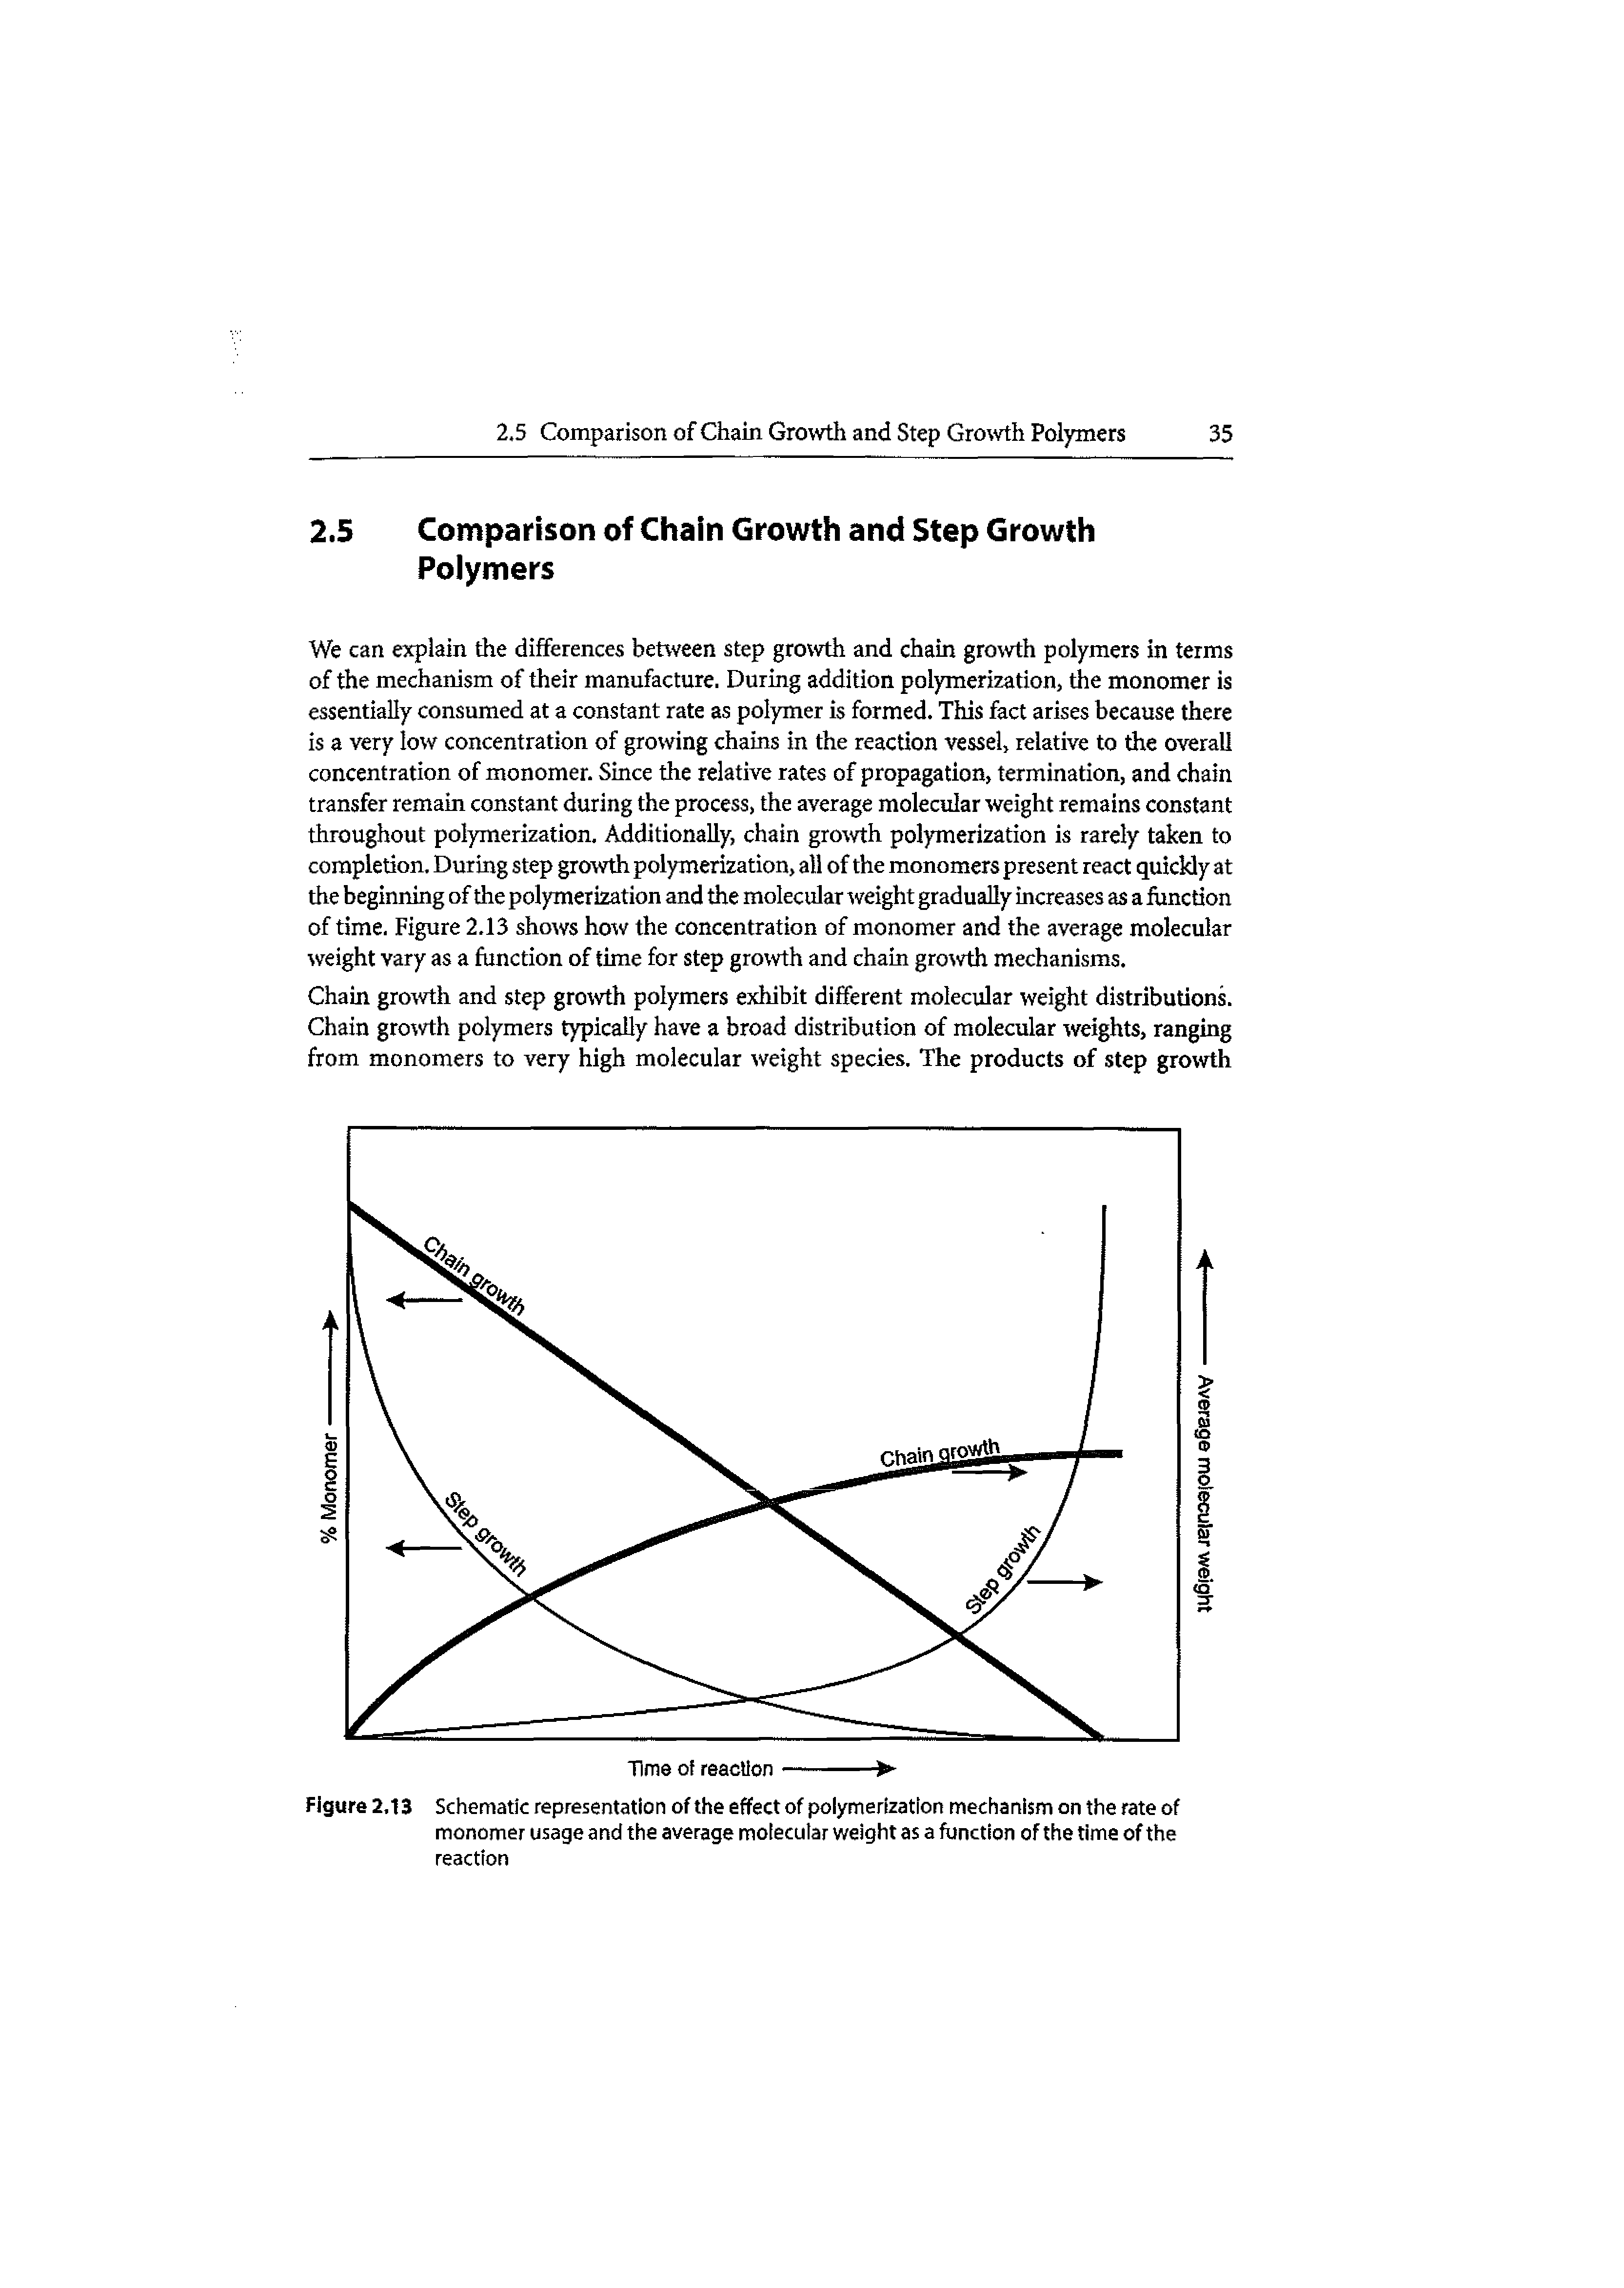 Figure 2,13 Schematic representation of the effect of polymerization mechanism on the rate of monomer usage and the average molecular weight as a function of the time of the reaction...